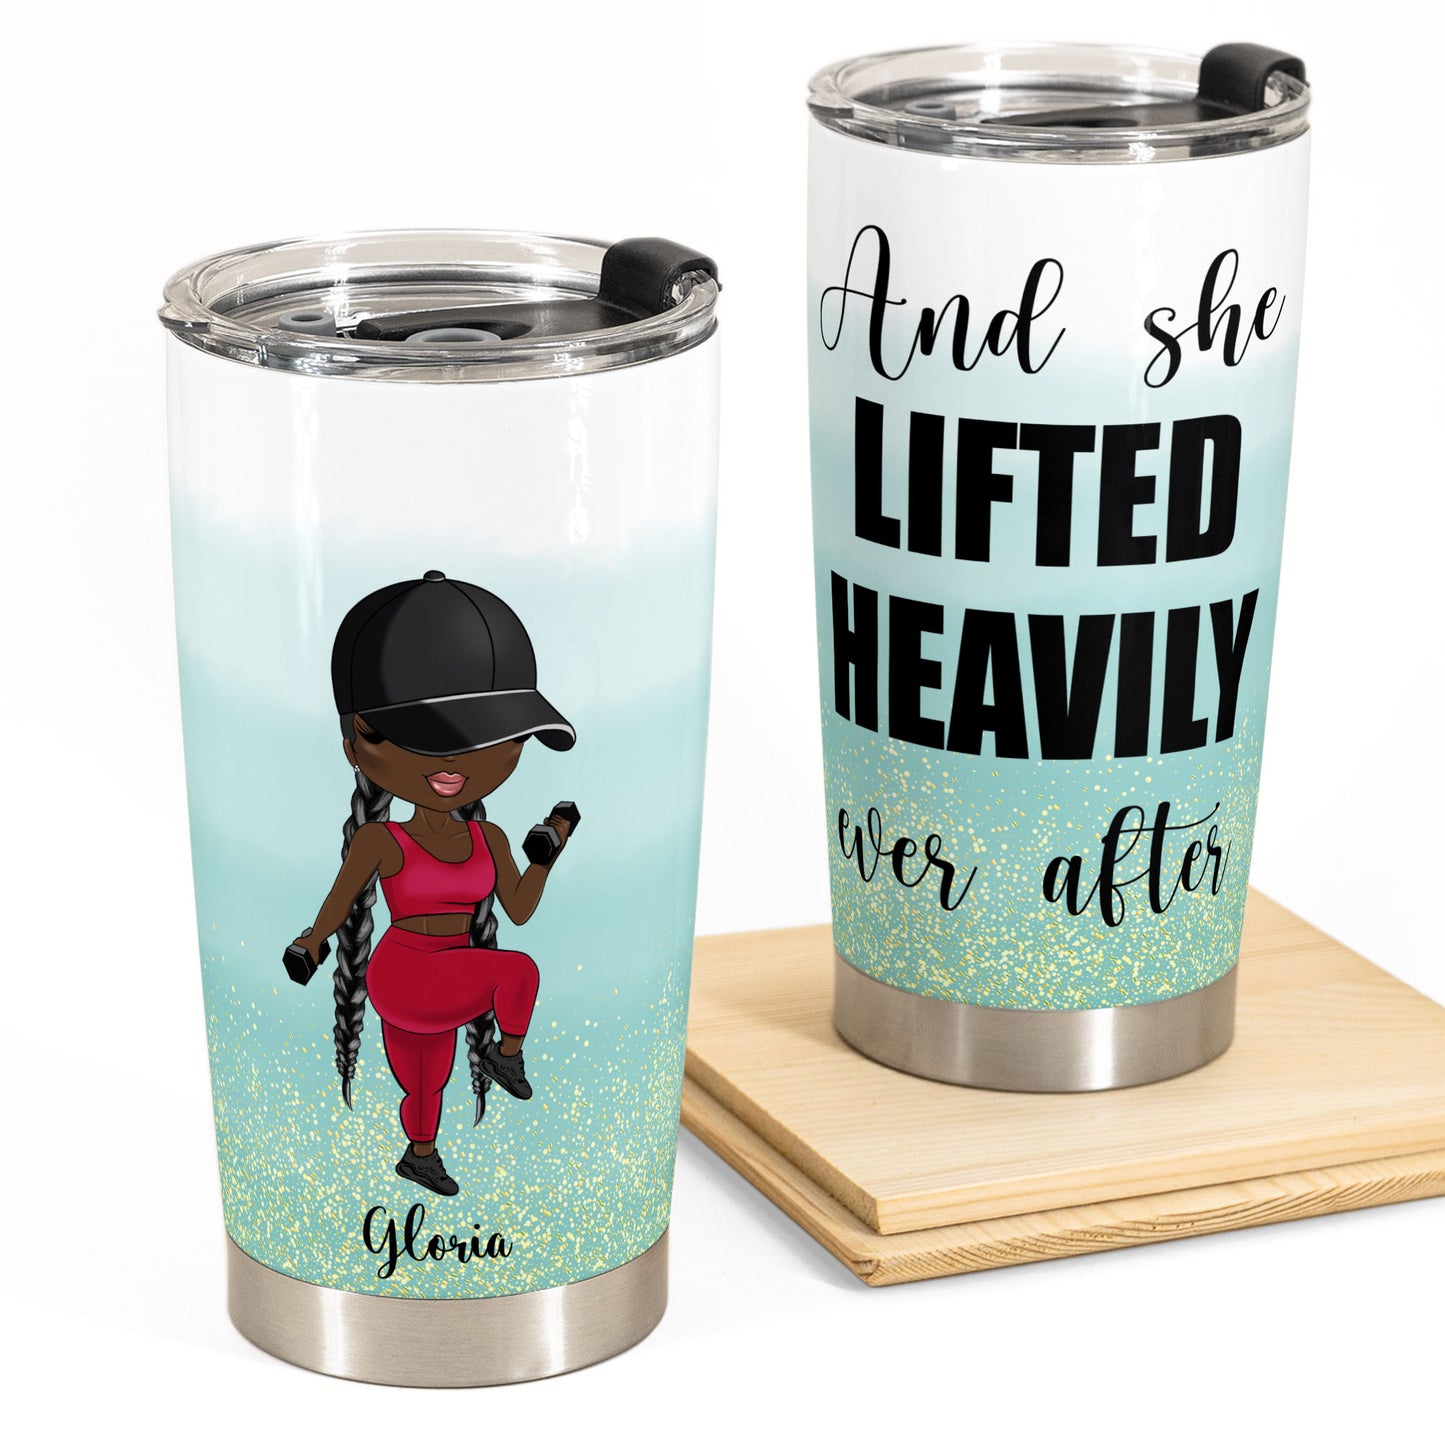 Just A Girl With Goals - Personalized Tumbler Cup - Cute Fitness Girl